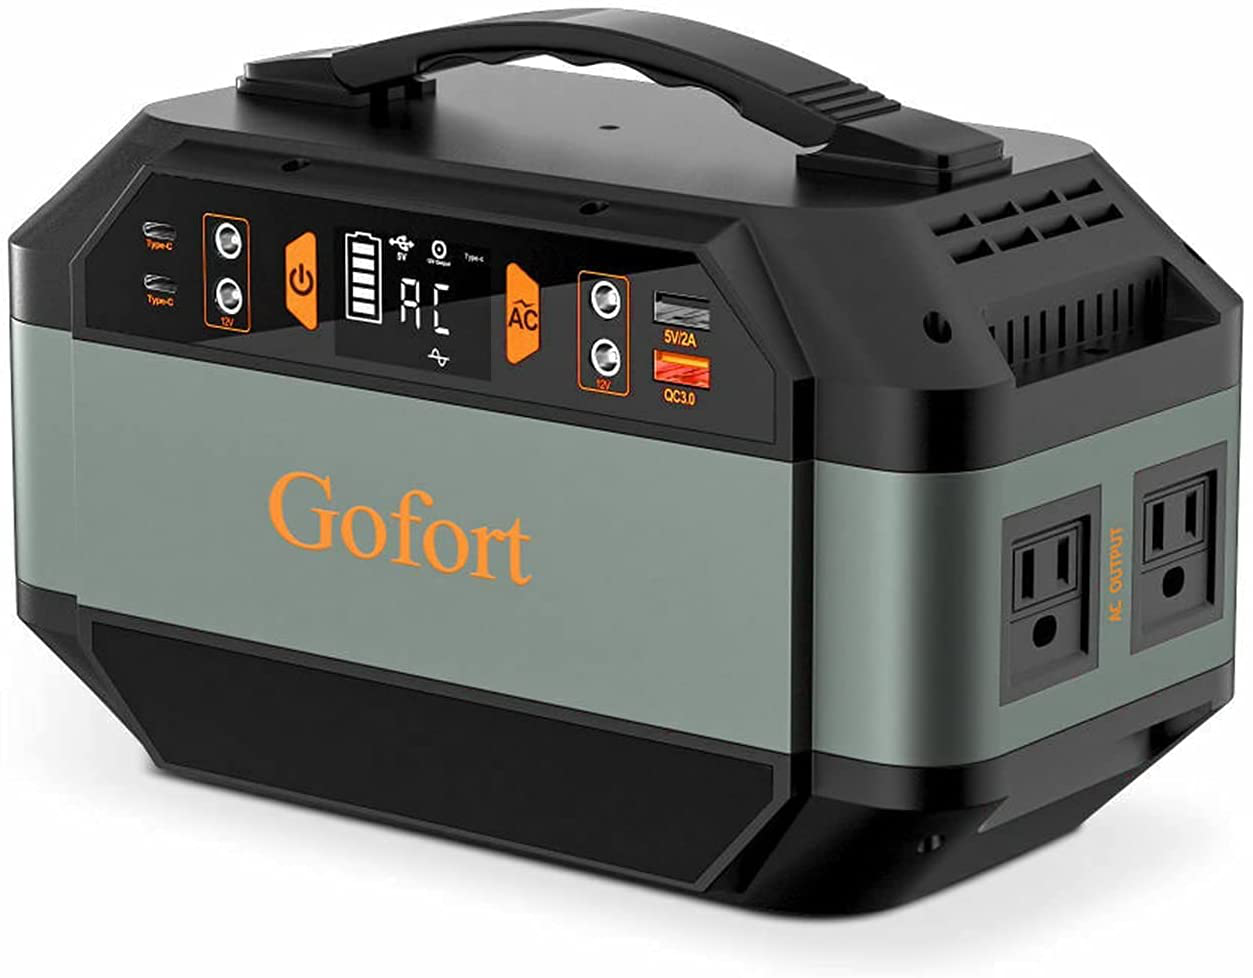 GOFORT 330W Portable Power Station, 299Wh Solar Generator Backup Power, Battery Pack with 110V AC Outlets/4 DC/2 QC 3.0 USB/2 Type-C Port for CPAP Outdoor Camping RV Travel Home Emergency Power Supply